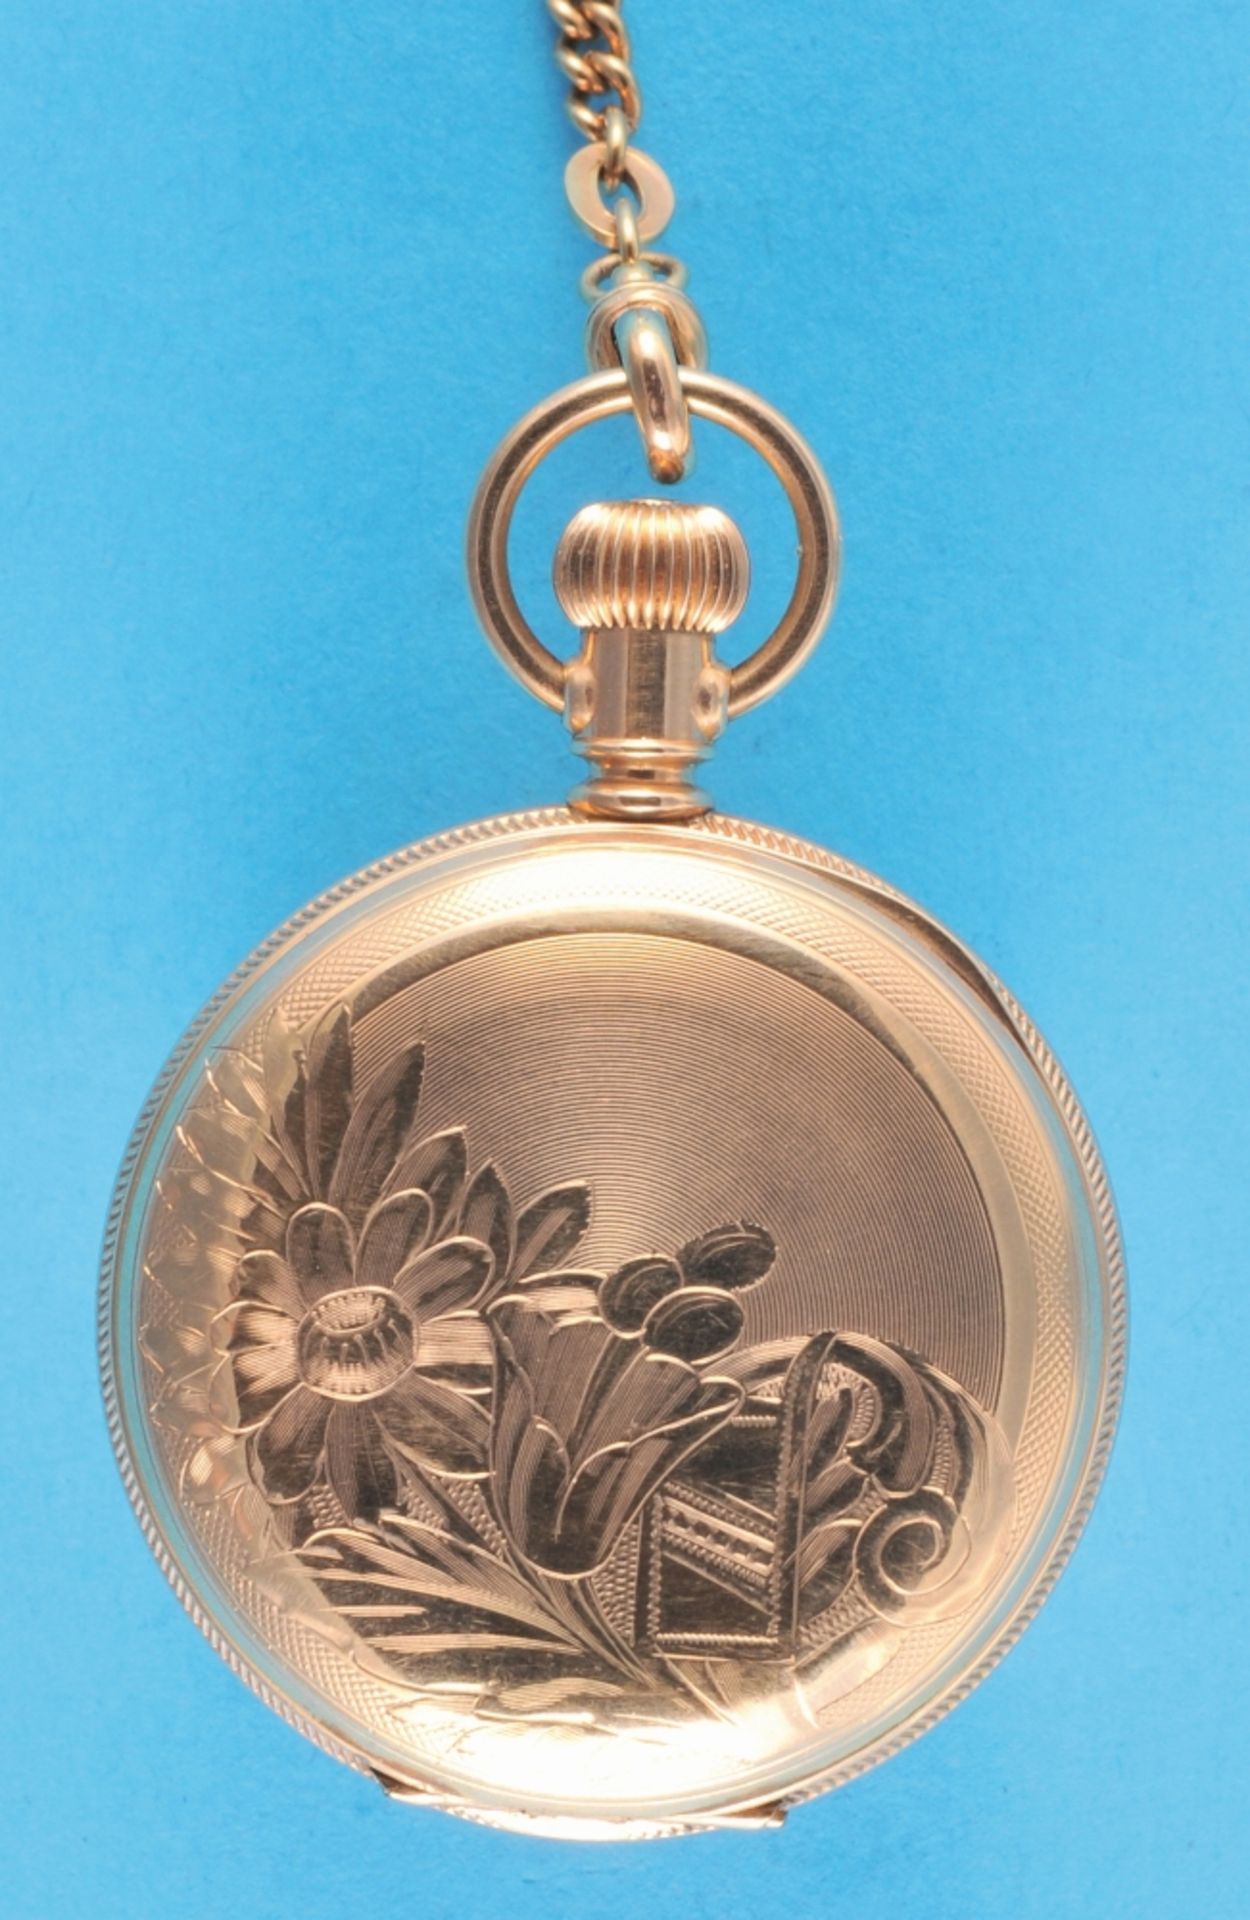 American Waltham Watch Co., Safety Pinion, richly decorated with flowers engraved, gold-plated ladie